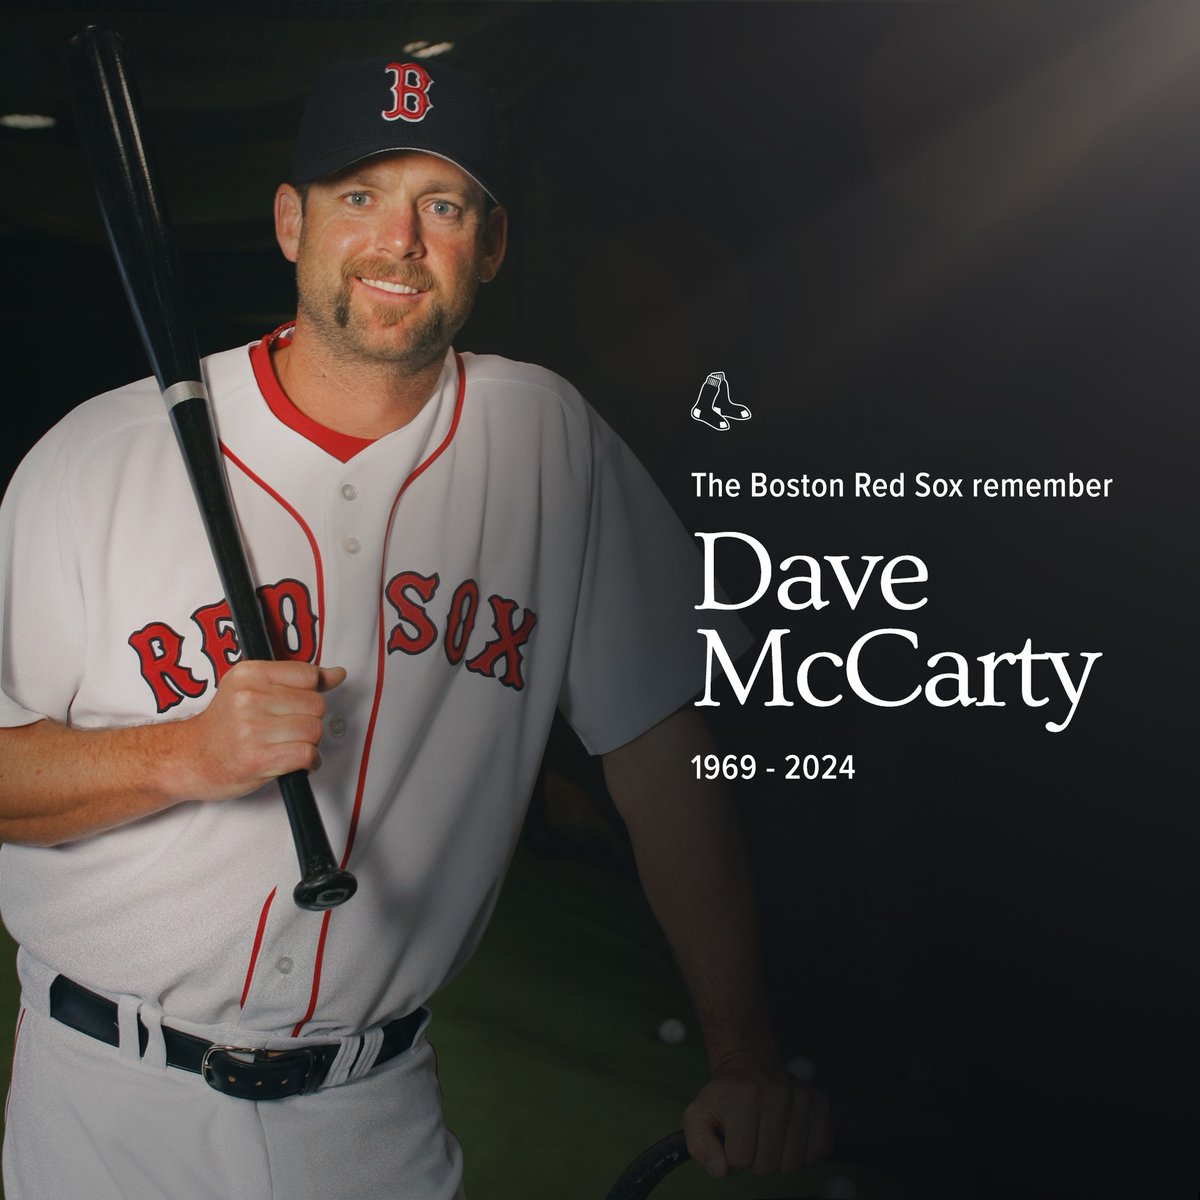 Our hearts are heavy with the passing of Dave McCarty. Playing 3 seasons with the Red Sox, he will forever be a part of the curse-breaking 2004 World Series championship team. We send our love to his wife, Monica, and their children, Reid and Maxine.